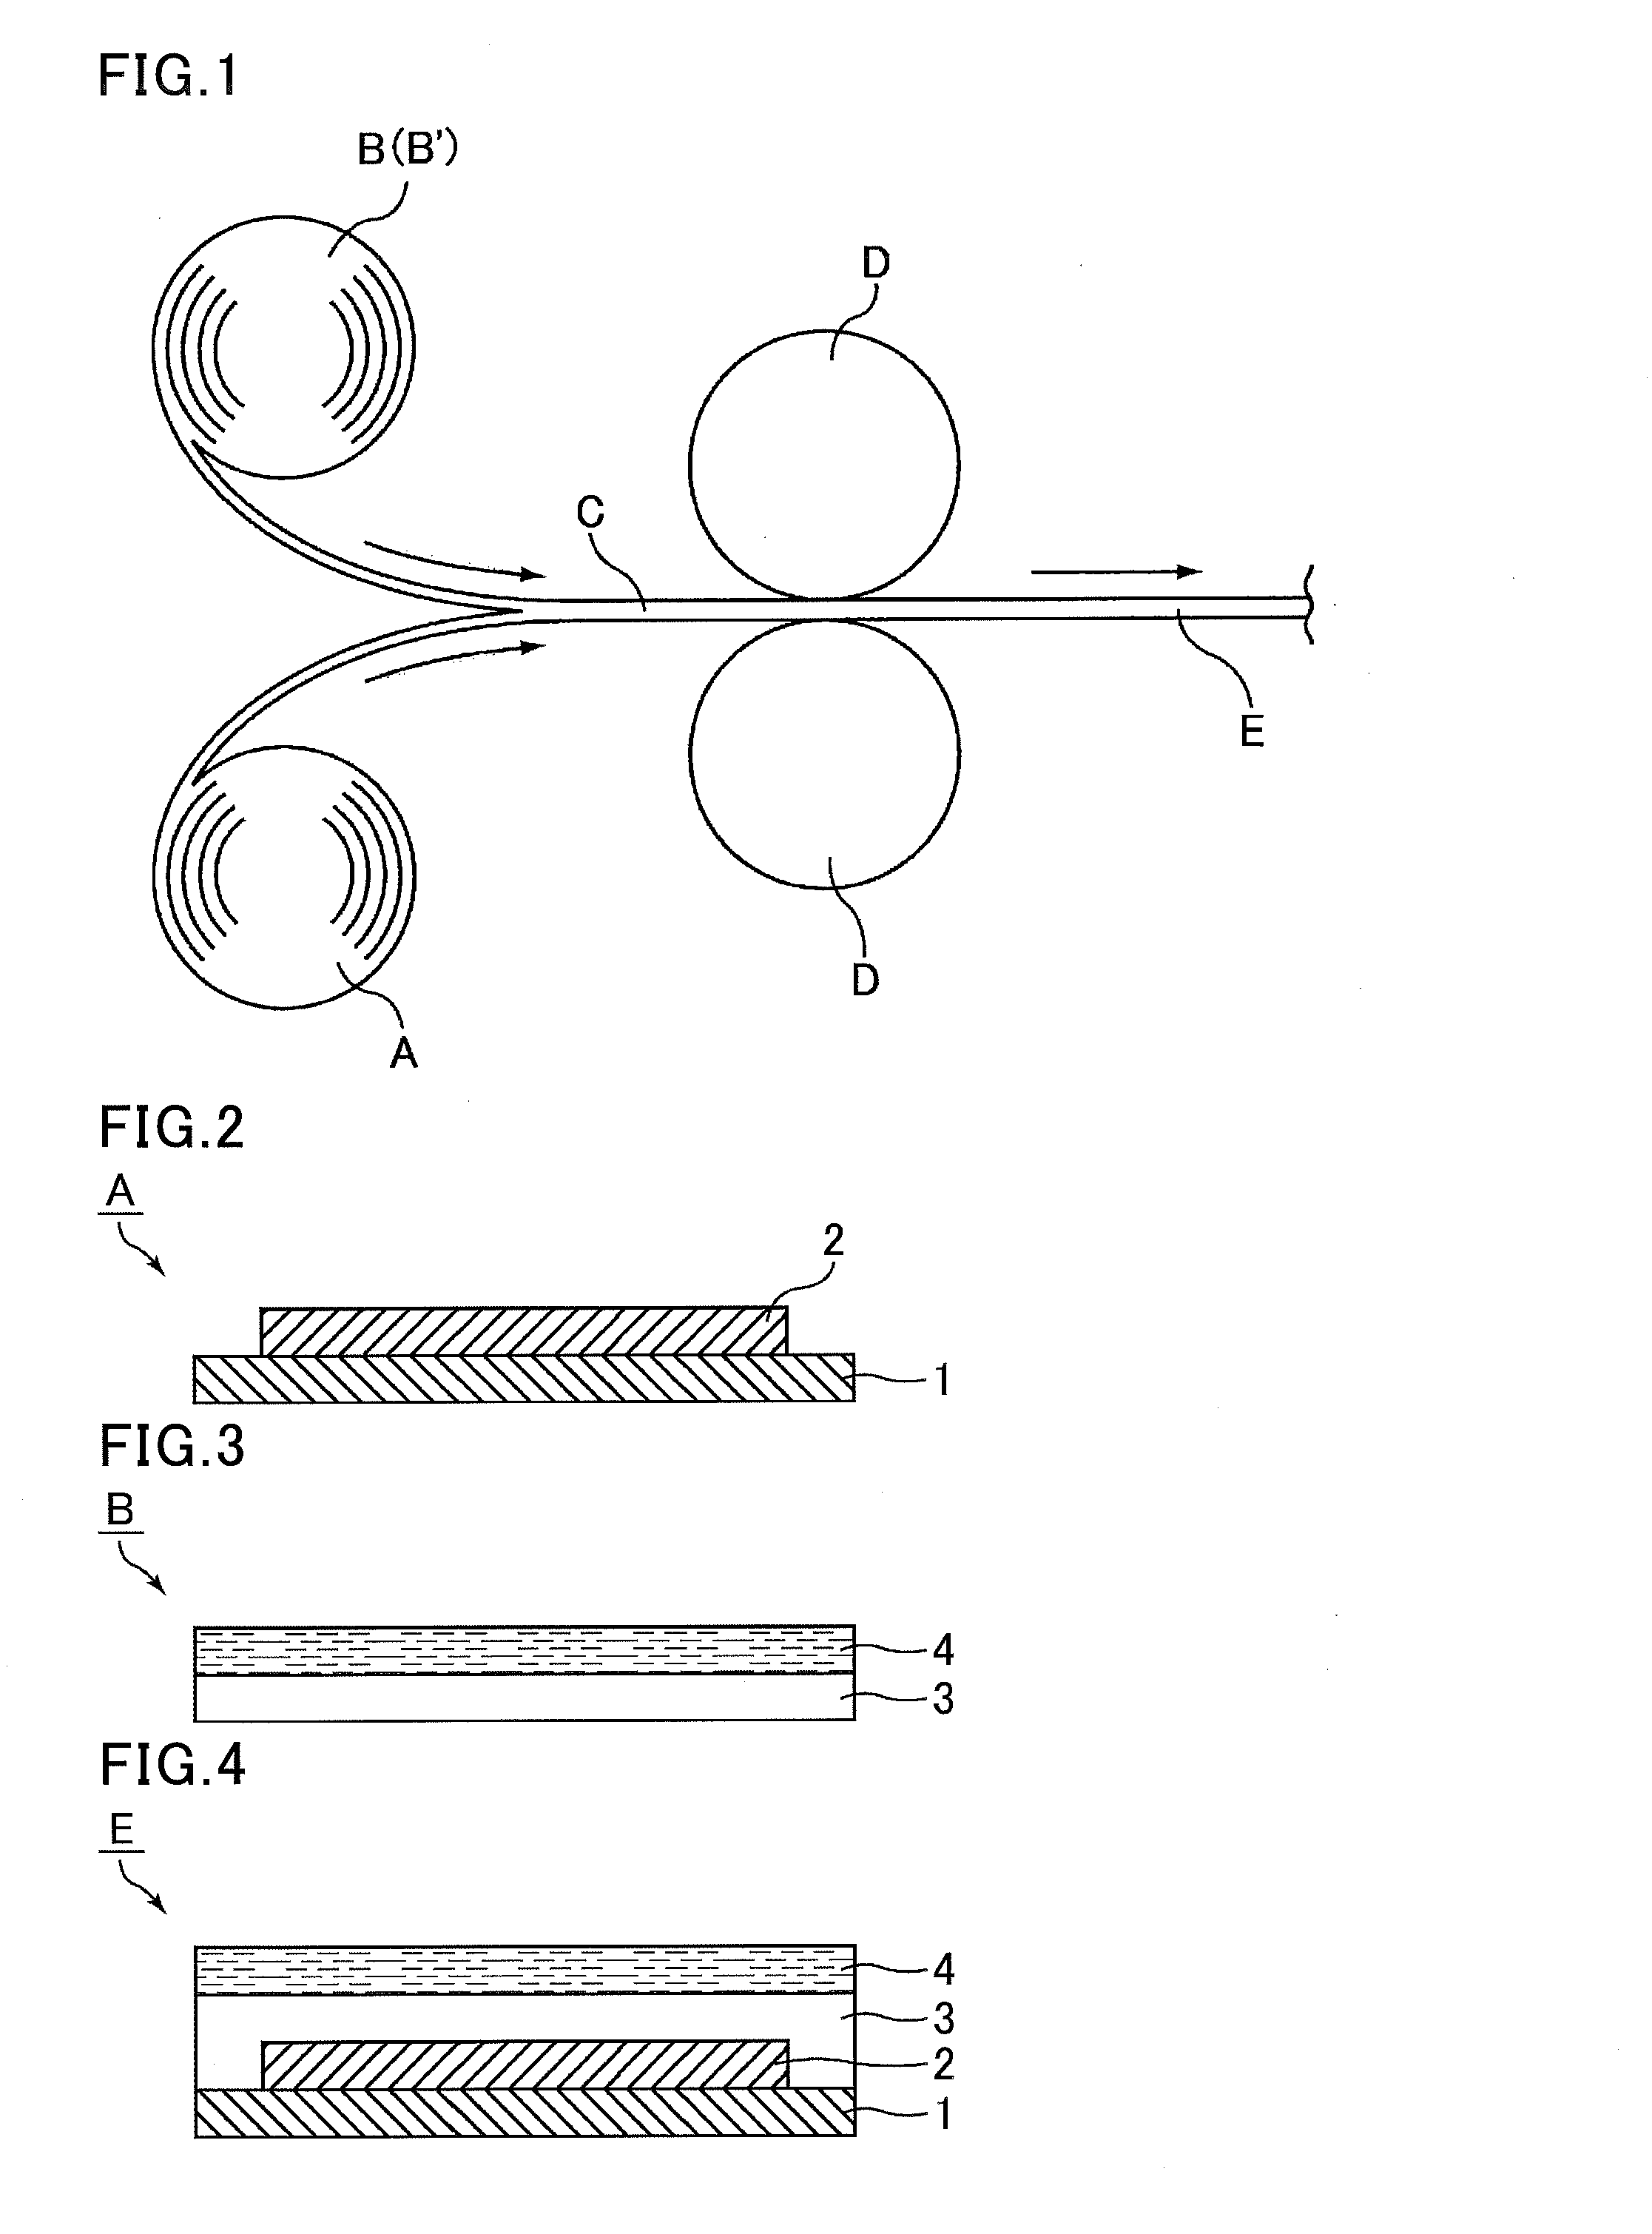 Manufacturing method for flexible solar cell modules